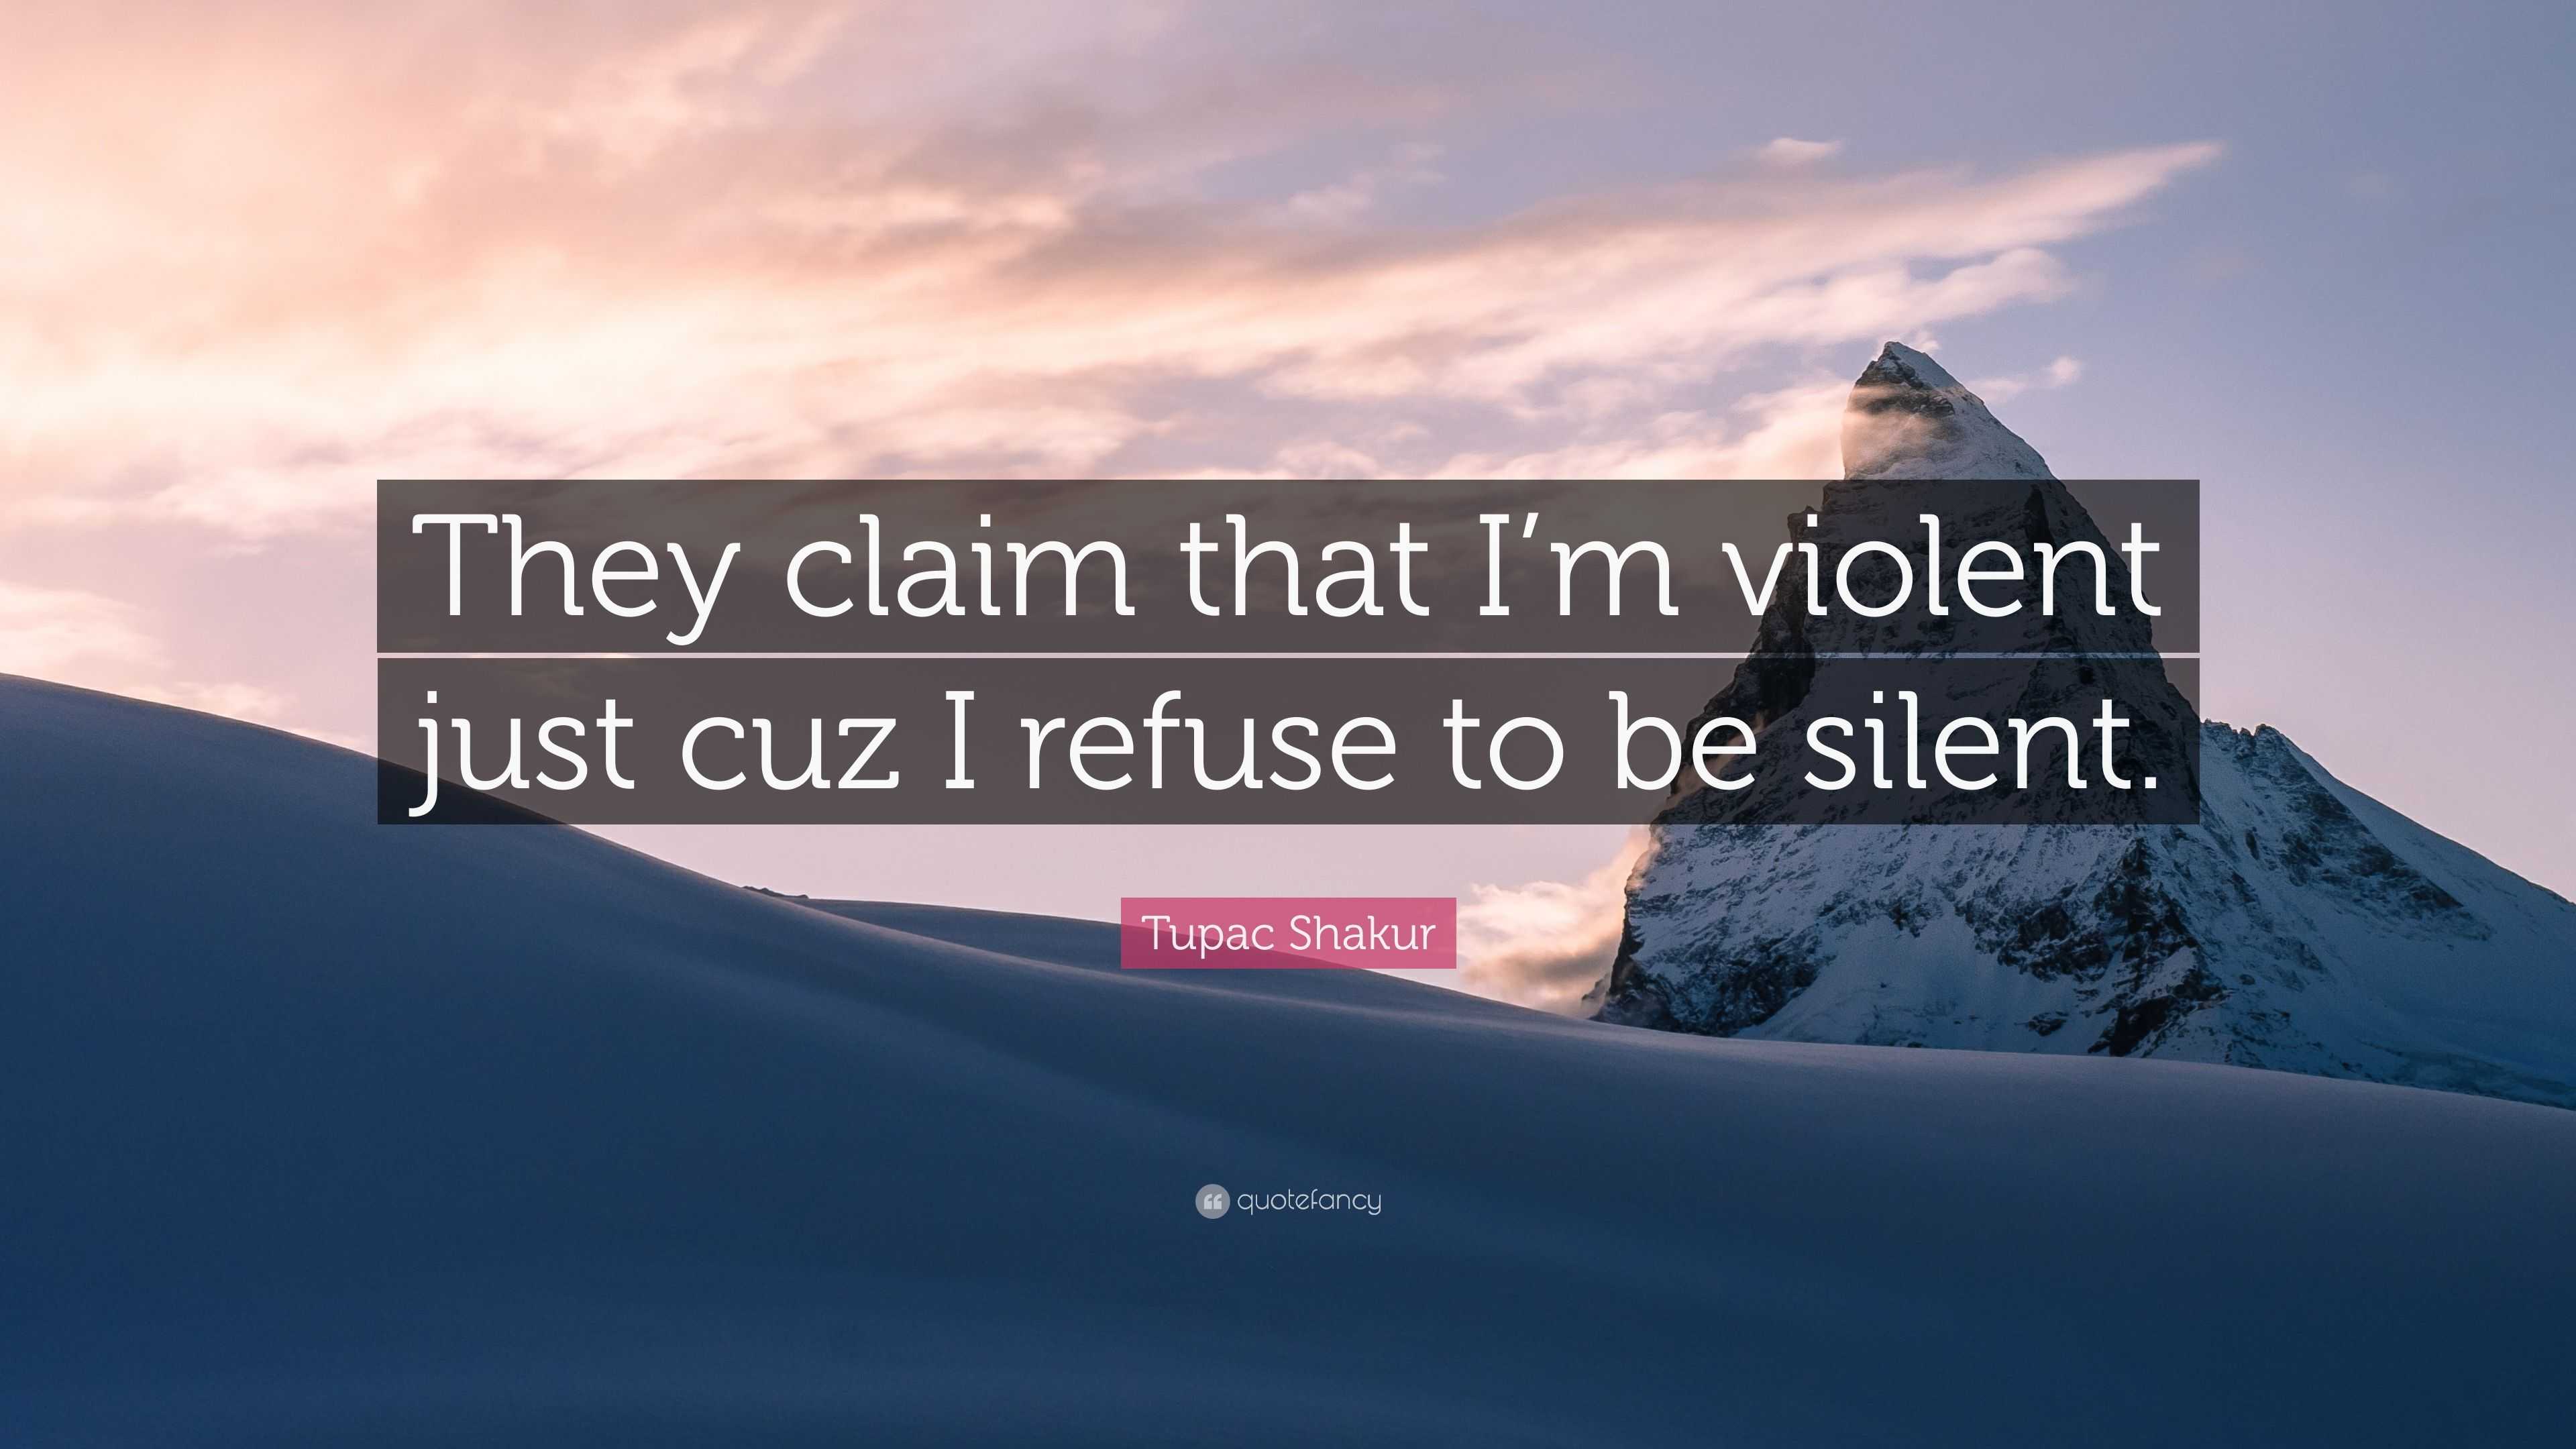 Tupac Shakur Quote: “They claim that I'm violent just cuz I refuse to be  silent.”